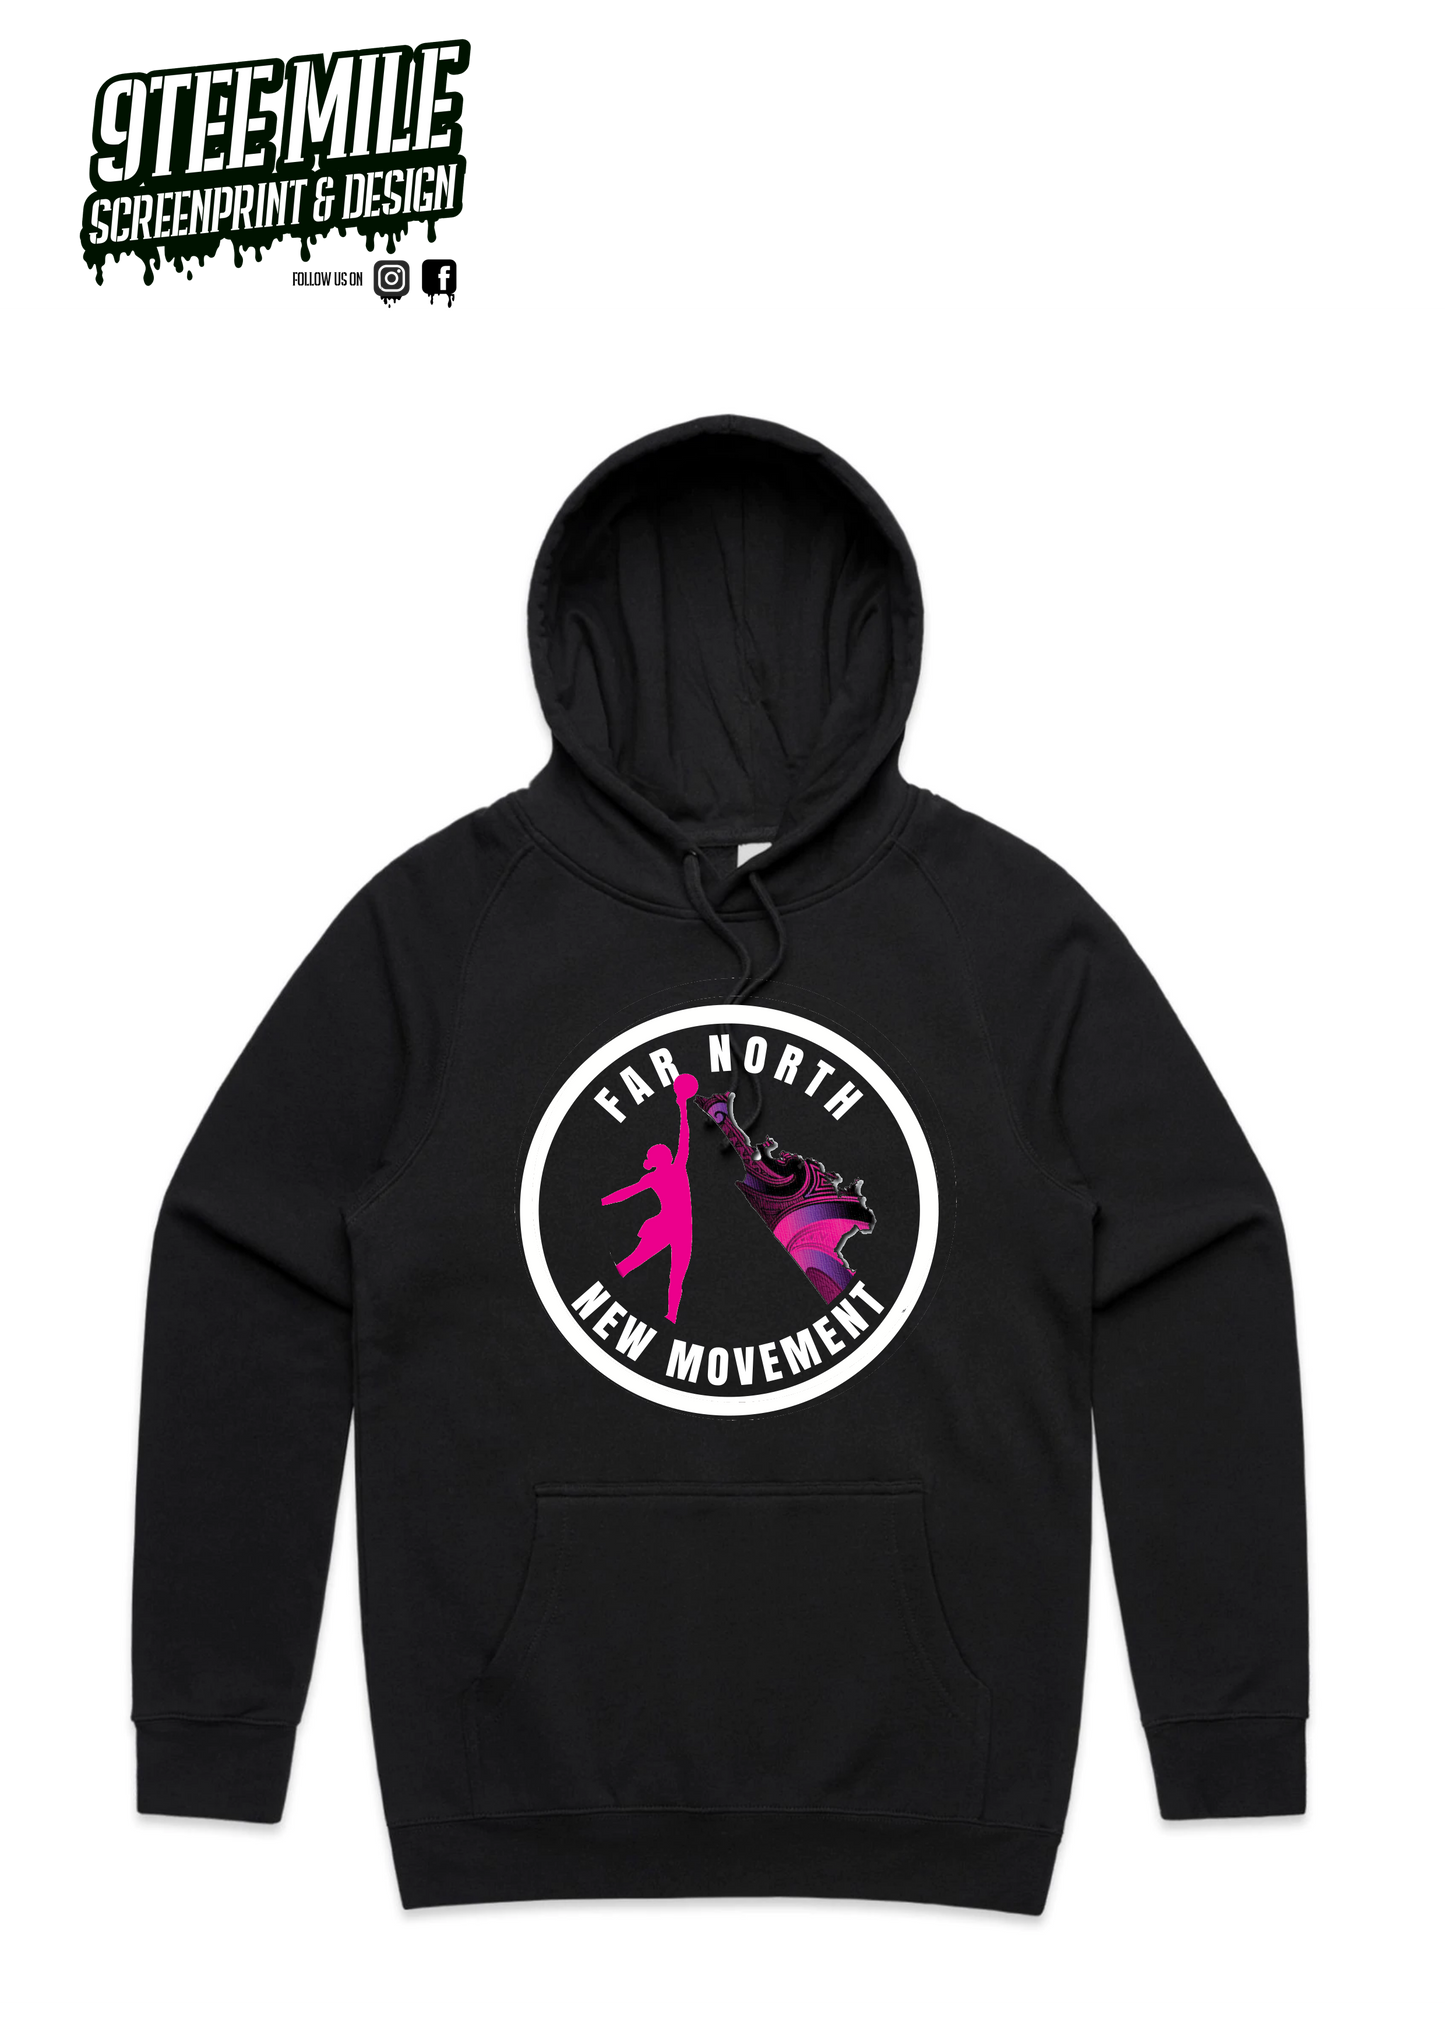 Far North New Movement Hoodies - Adult - UNNAMED